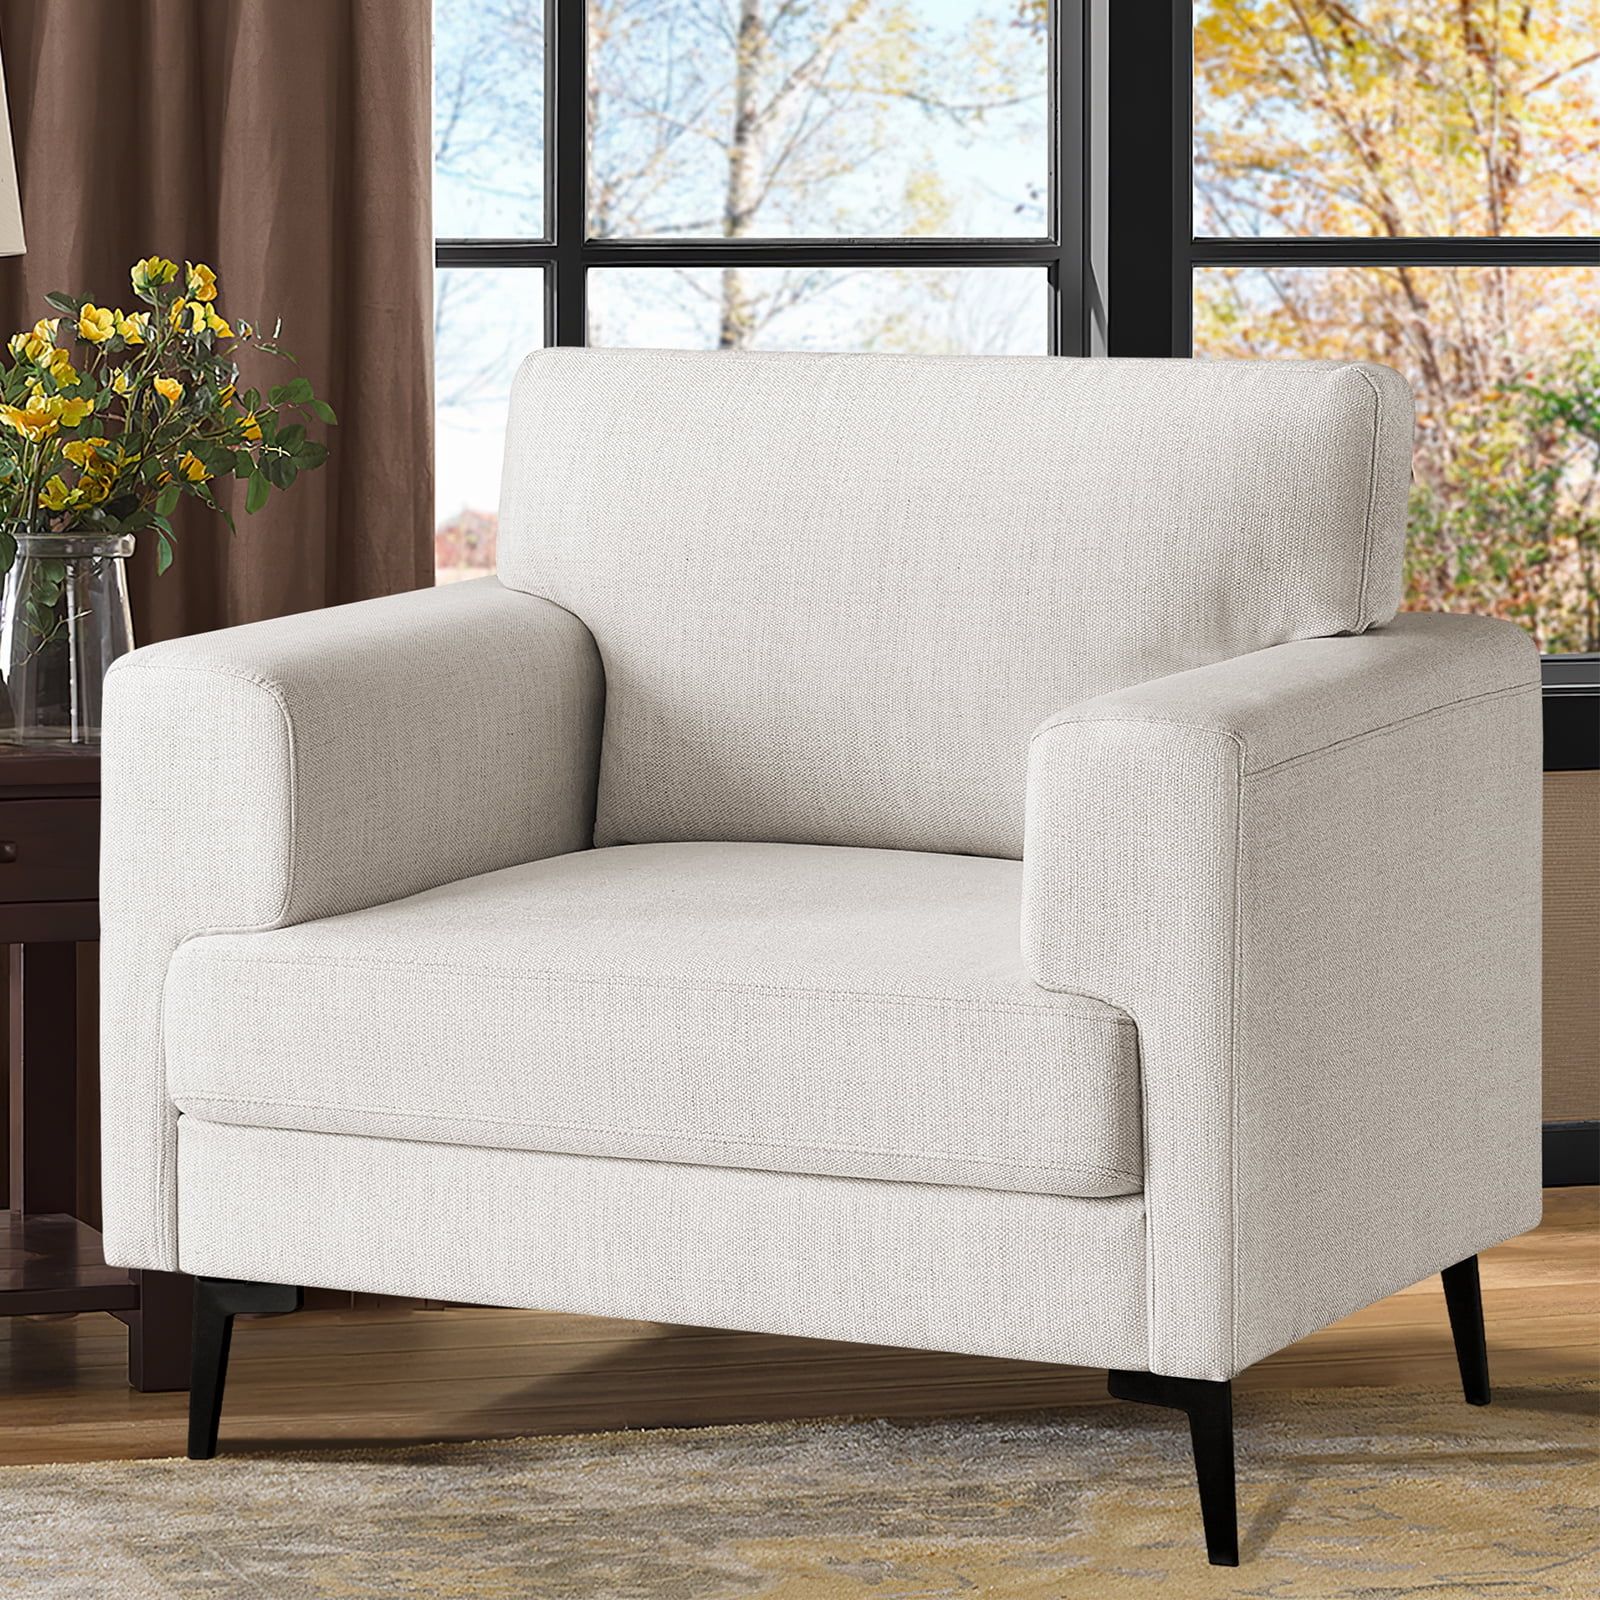 July's Song Accent Chair, 37.8” Wide Linen Upholstered Living Room Armchairs, Modern Comfy Fabr... | Walmart (US)